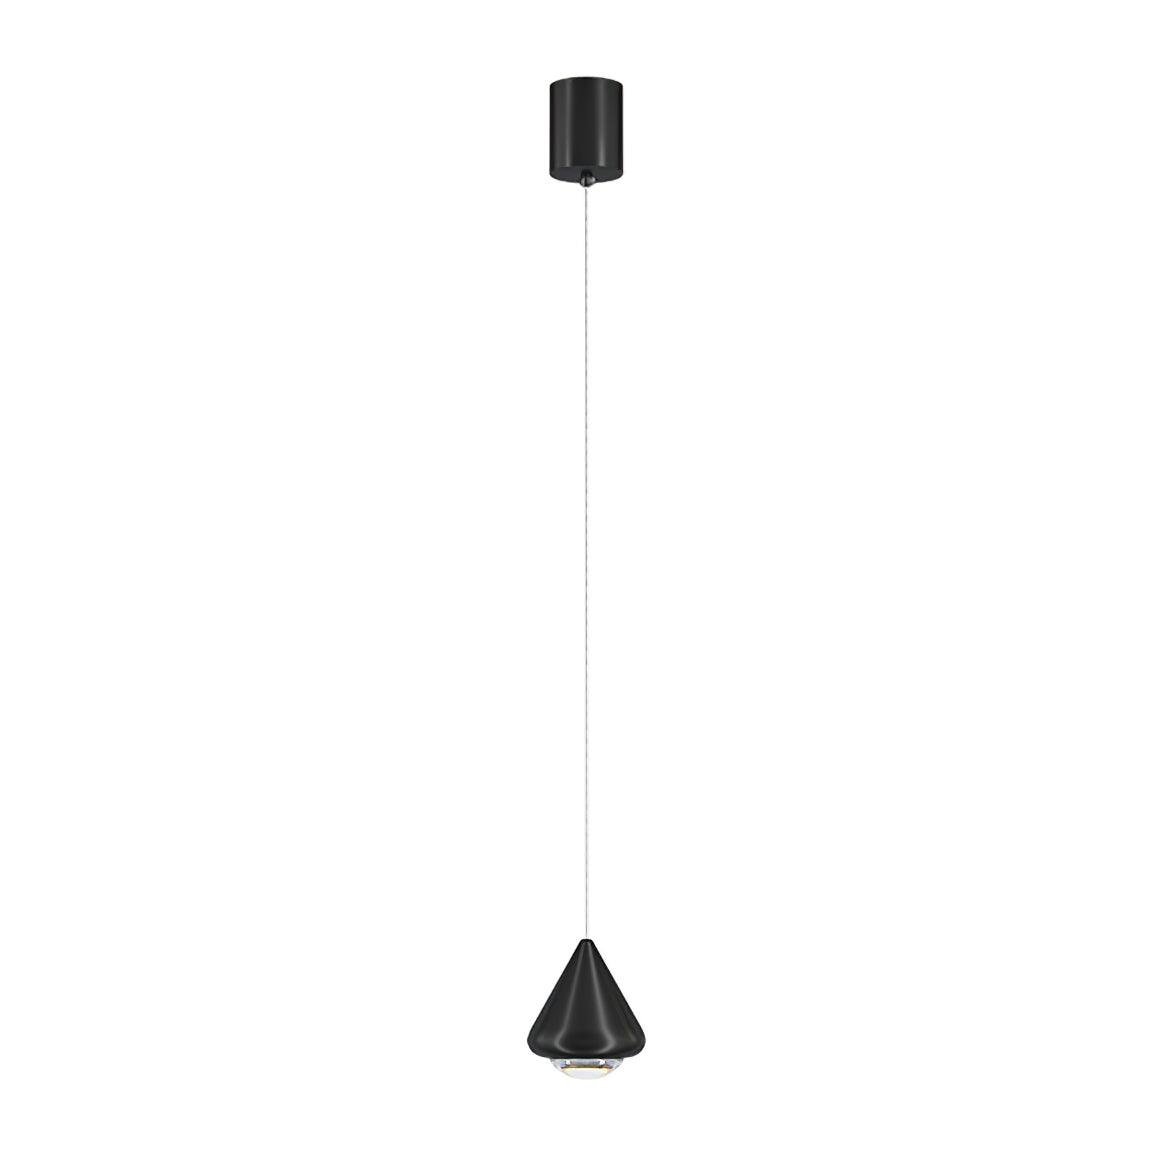 Black Cool Light Apollo Pendant Lamp with a diameter of 3.9 inches and a height of 59 inches (or 10cm x 150cm)